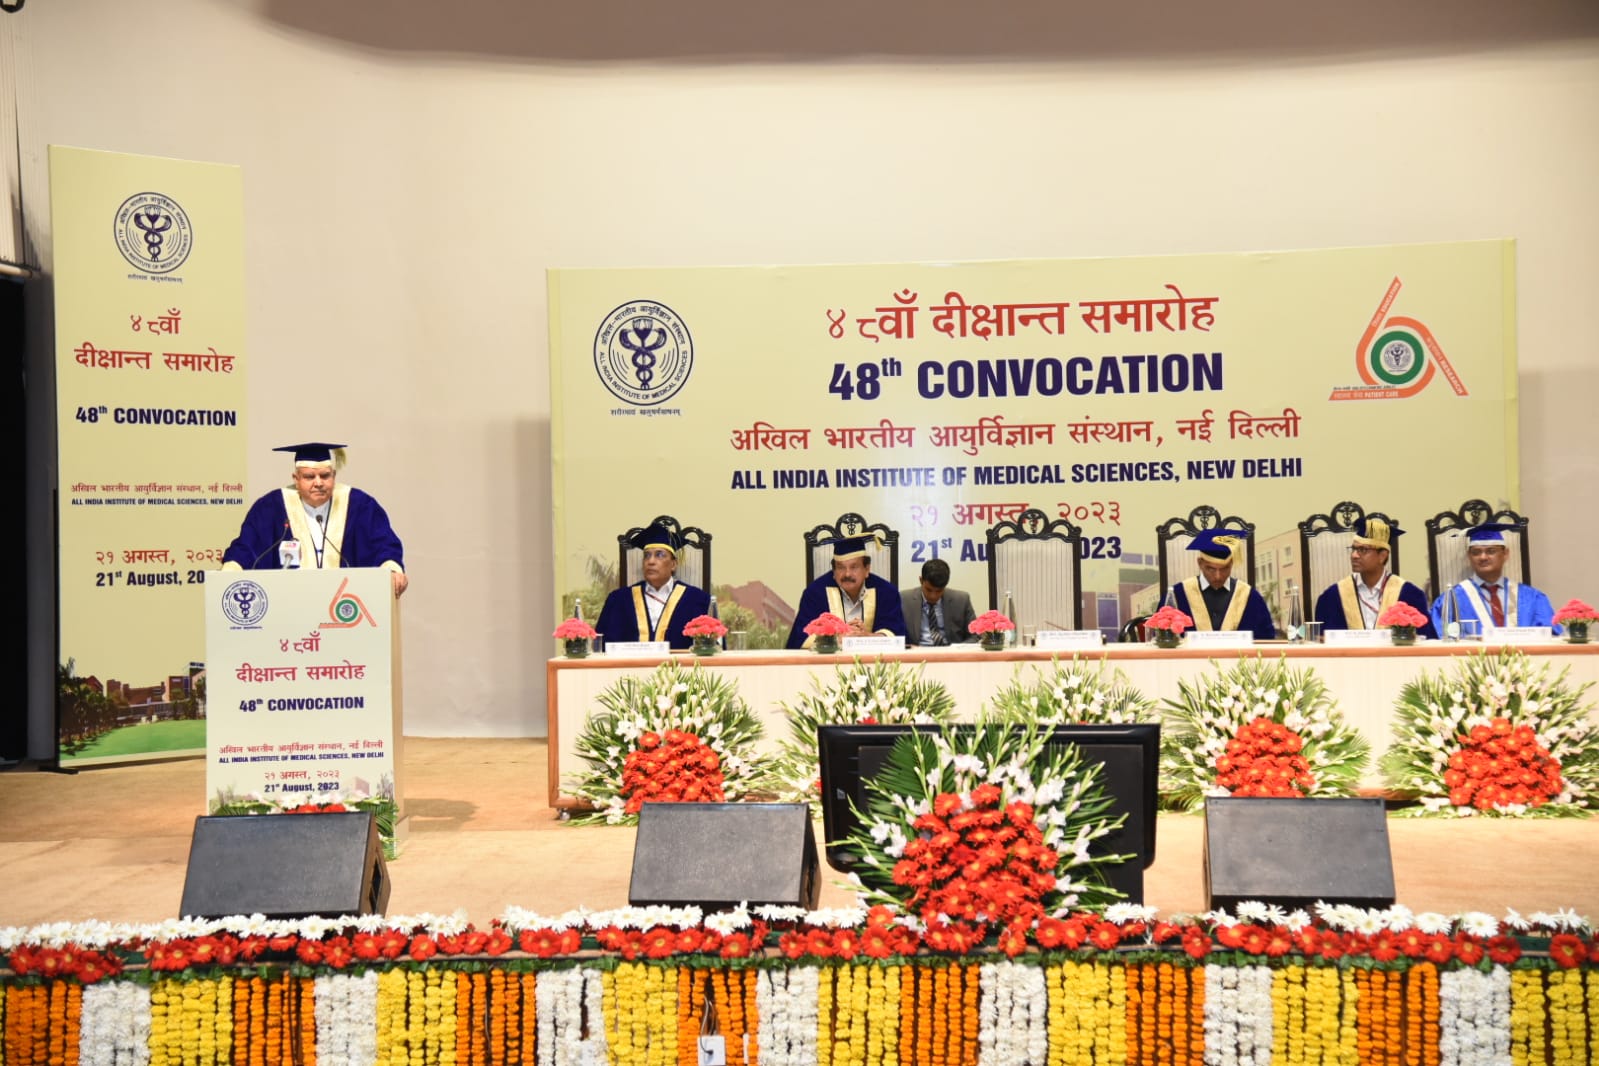 The Vice-President, Shri Jagdeep Dhankhar, addressing the gathering at the 48th Annual Convocation of All India Institute of Medical Sciences, New Delhi on August 21, 2023.